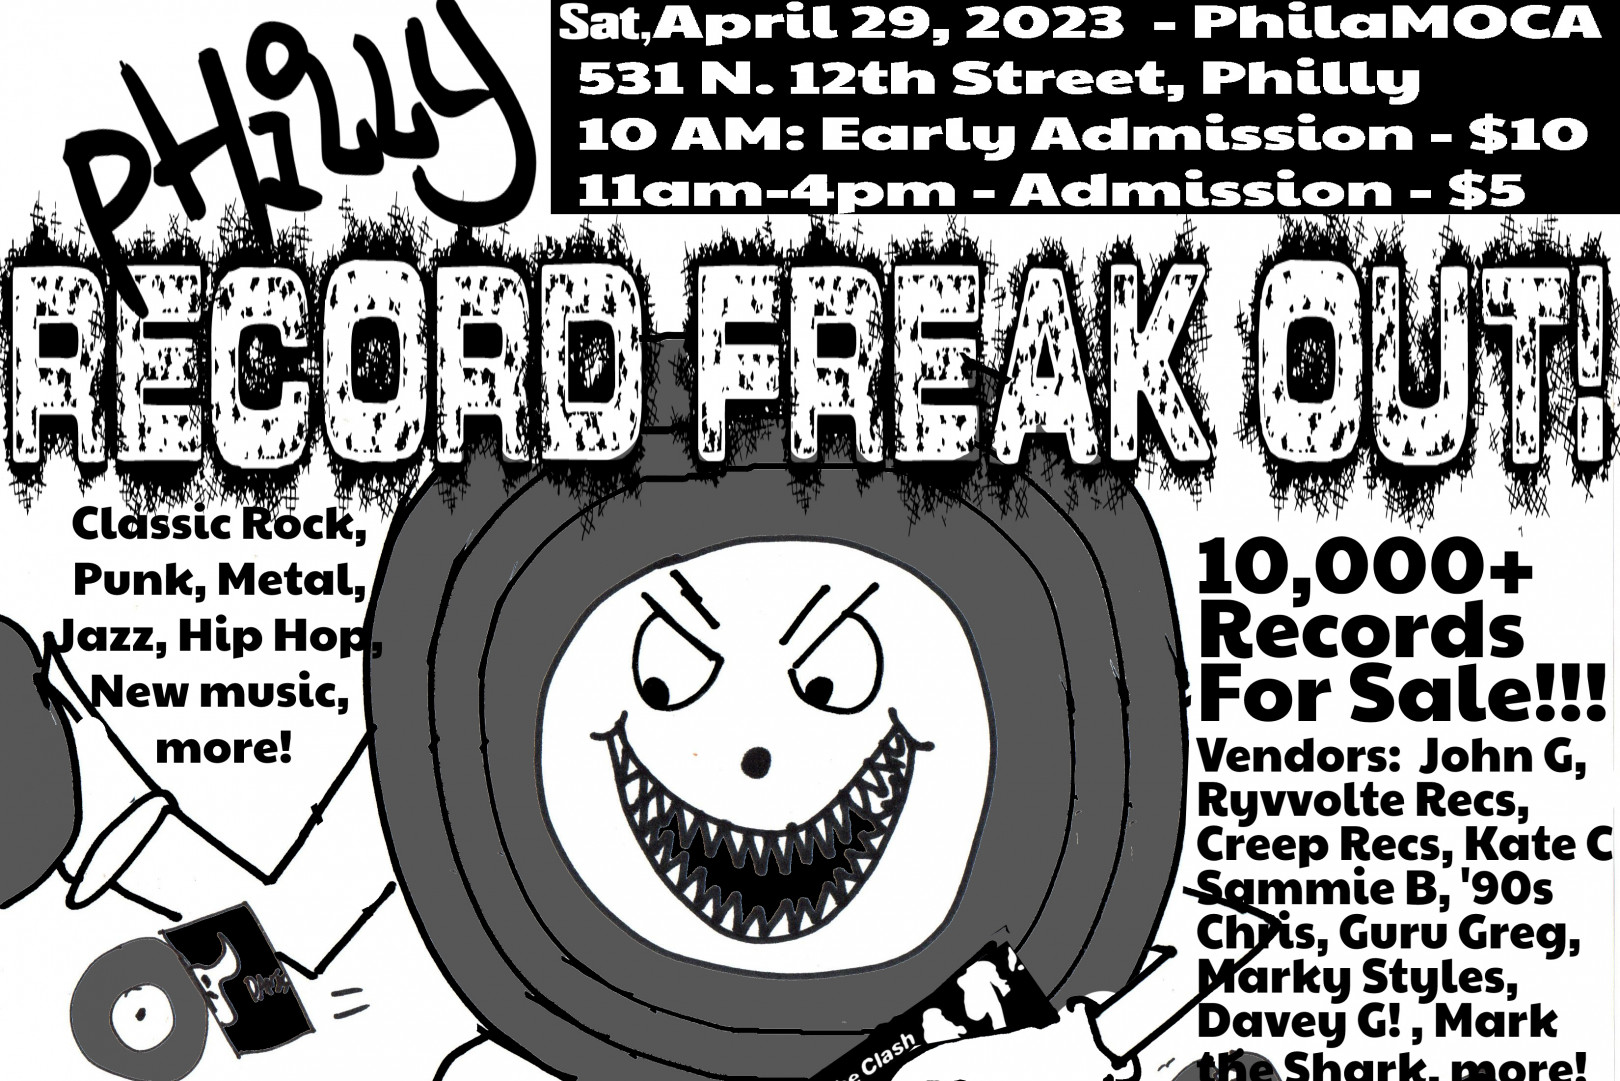 The Philly Record Freak Out is Tomorrow at 10am!!!